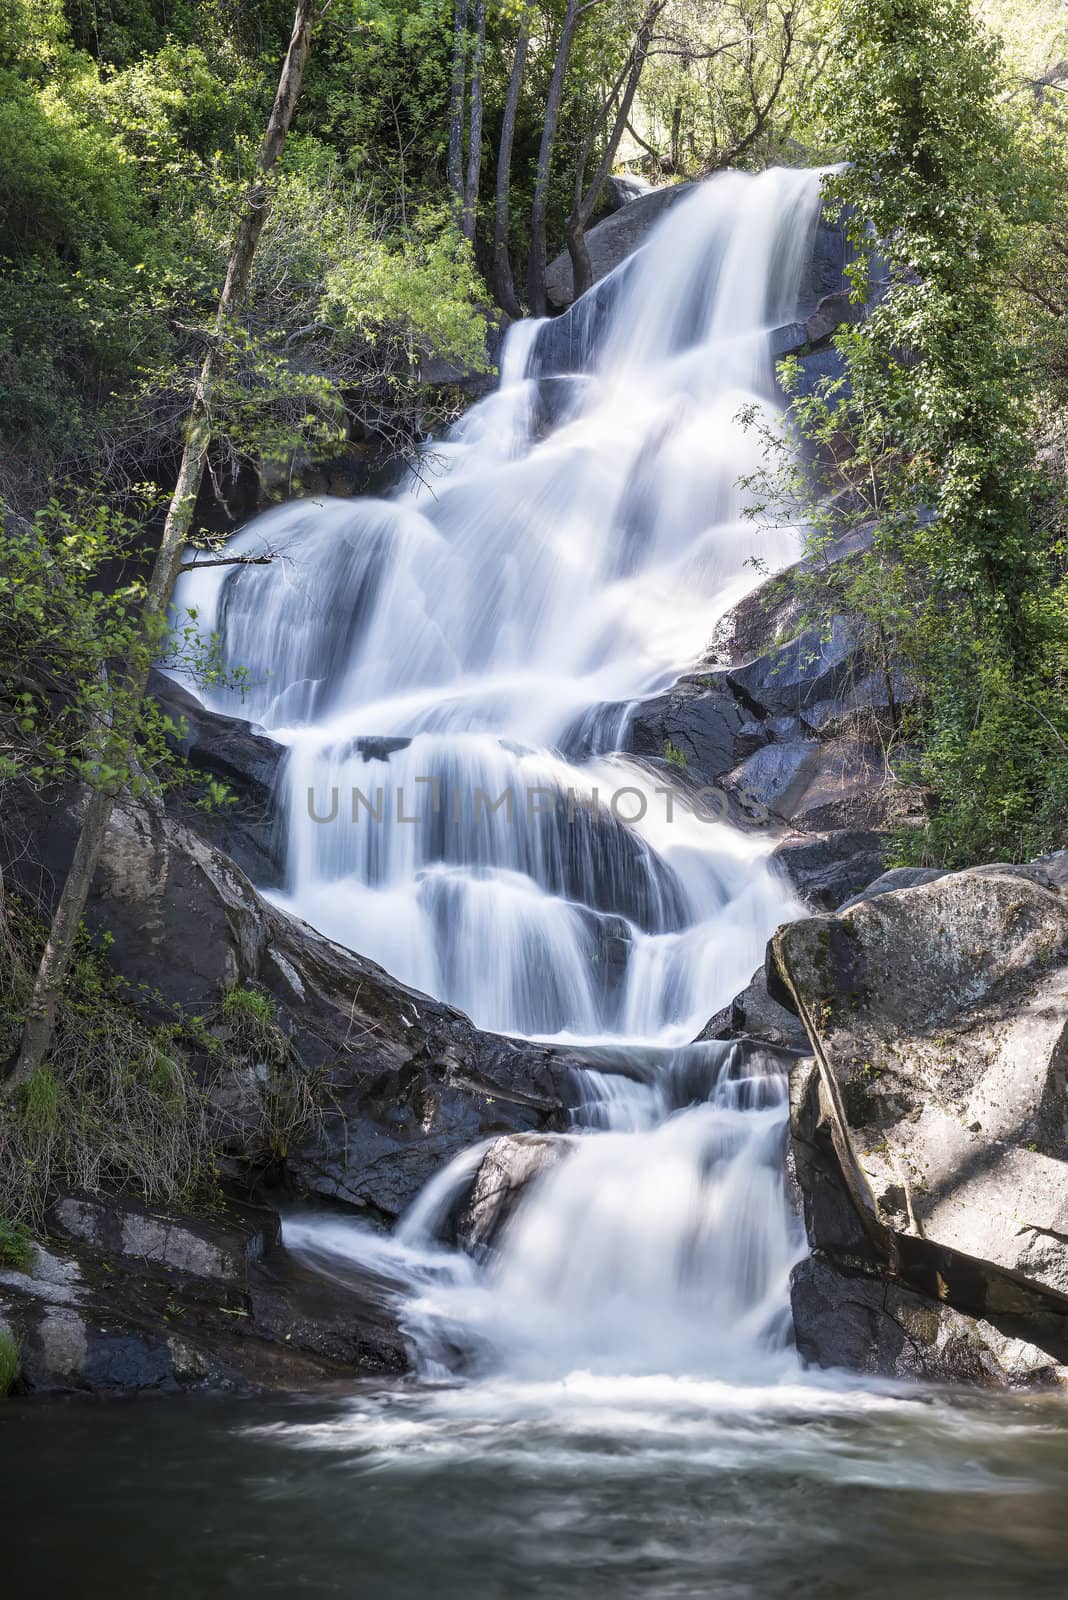 Cascades on a mountain river with a silky effect on the water that conveys a sense of relaxation.